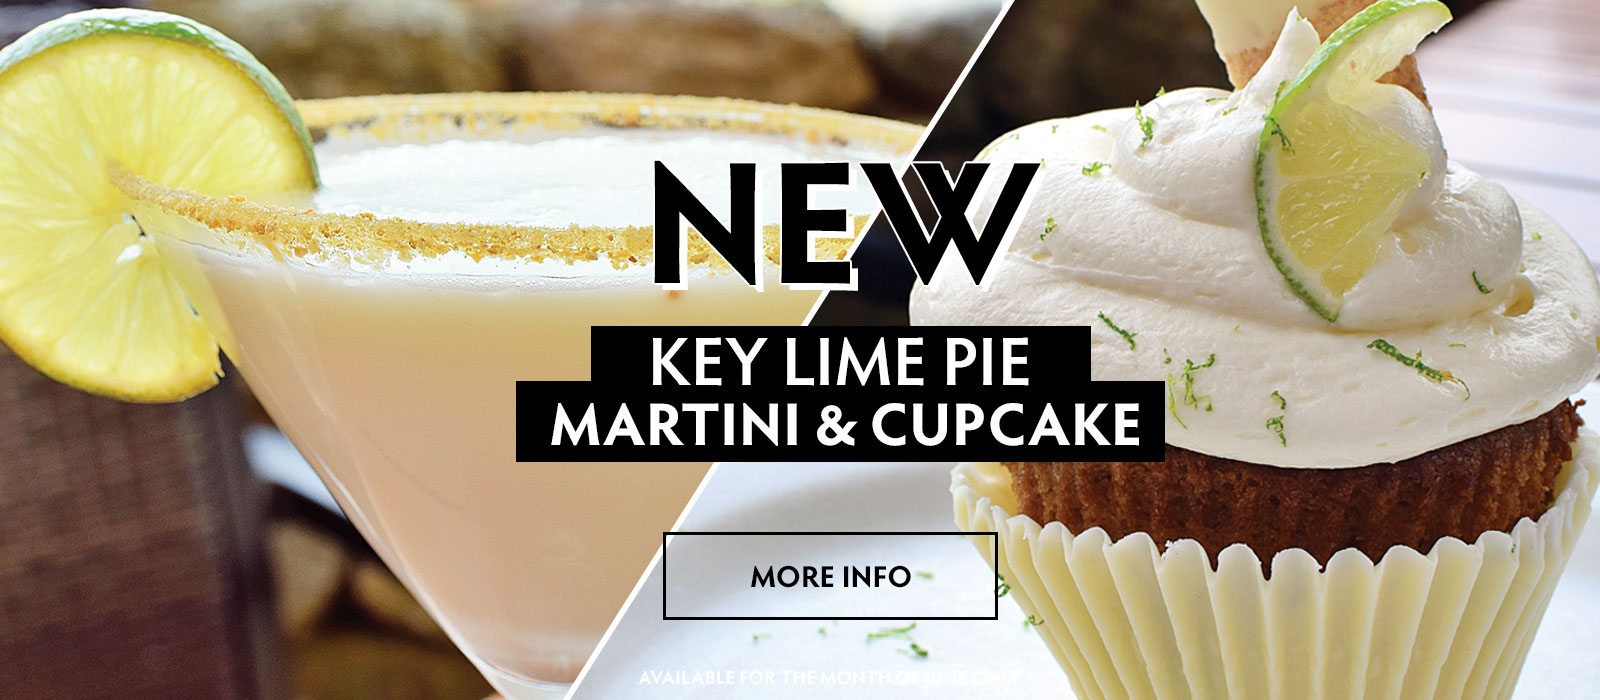 Martini and Cupcake of the Month at Copper Door